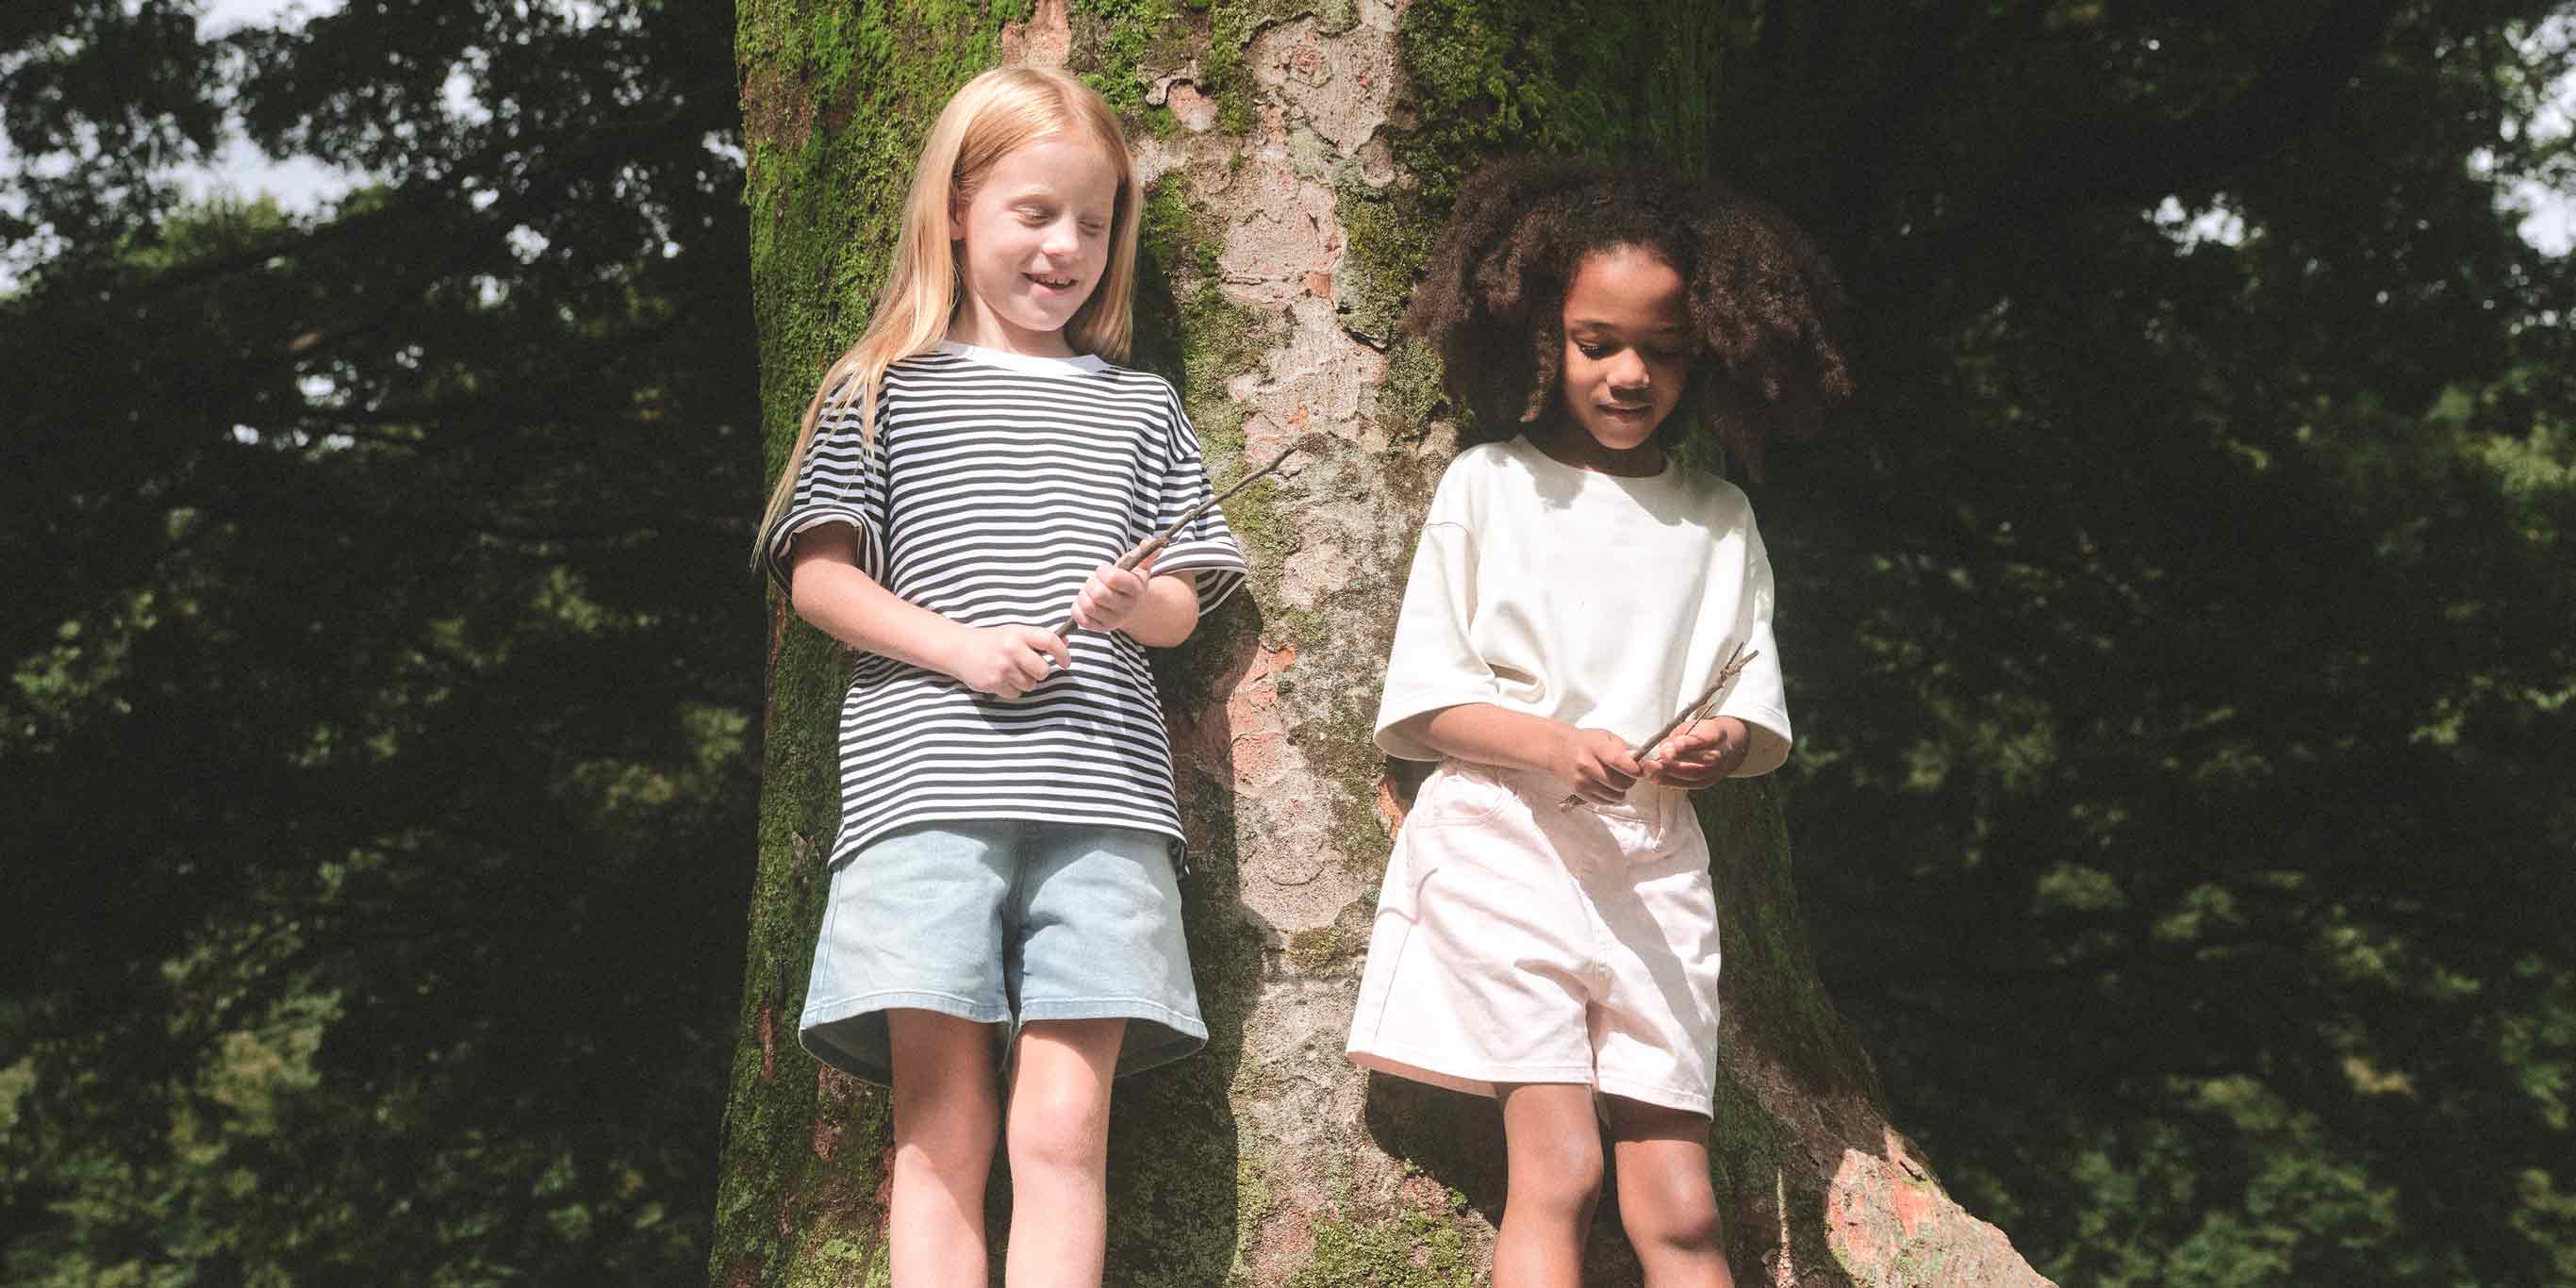 Make playtime or anytime extra comfortable
with shorts the little ones will love.